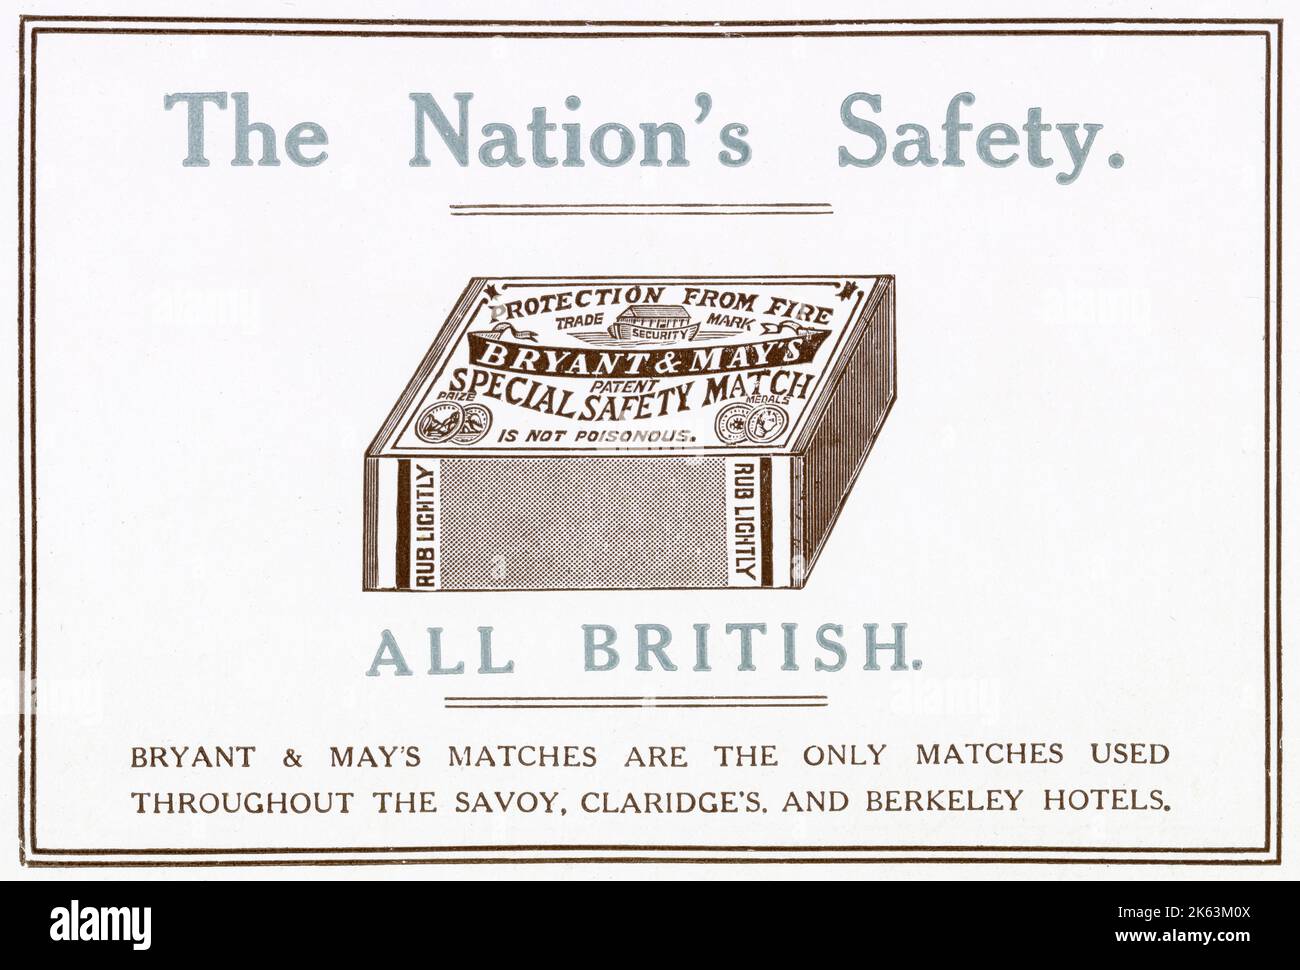 Advertisement for a British company Bryant & May's, special safety matches. Stock Photo